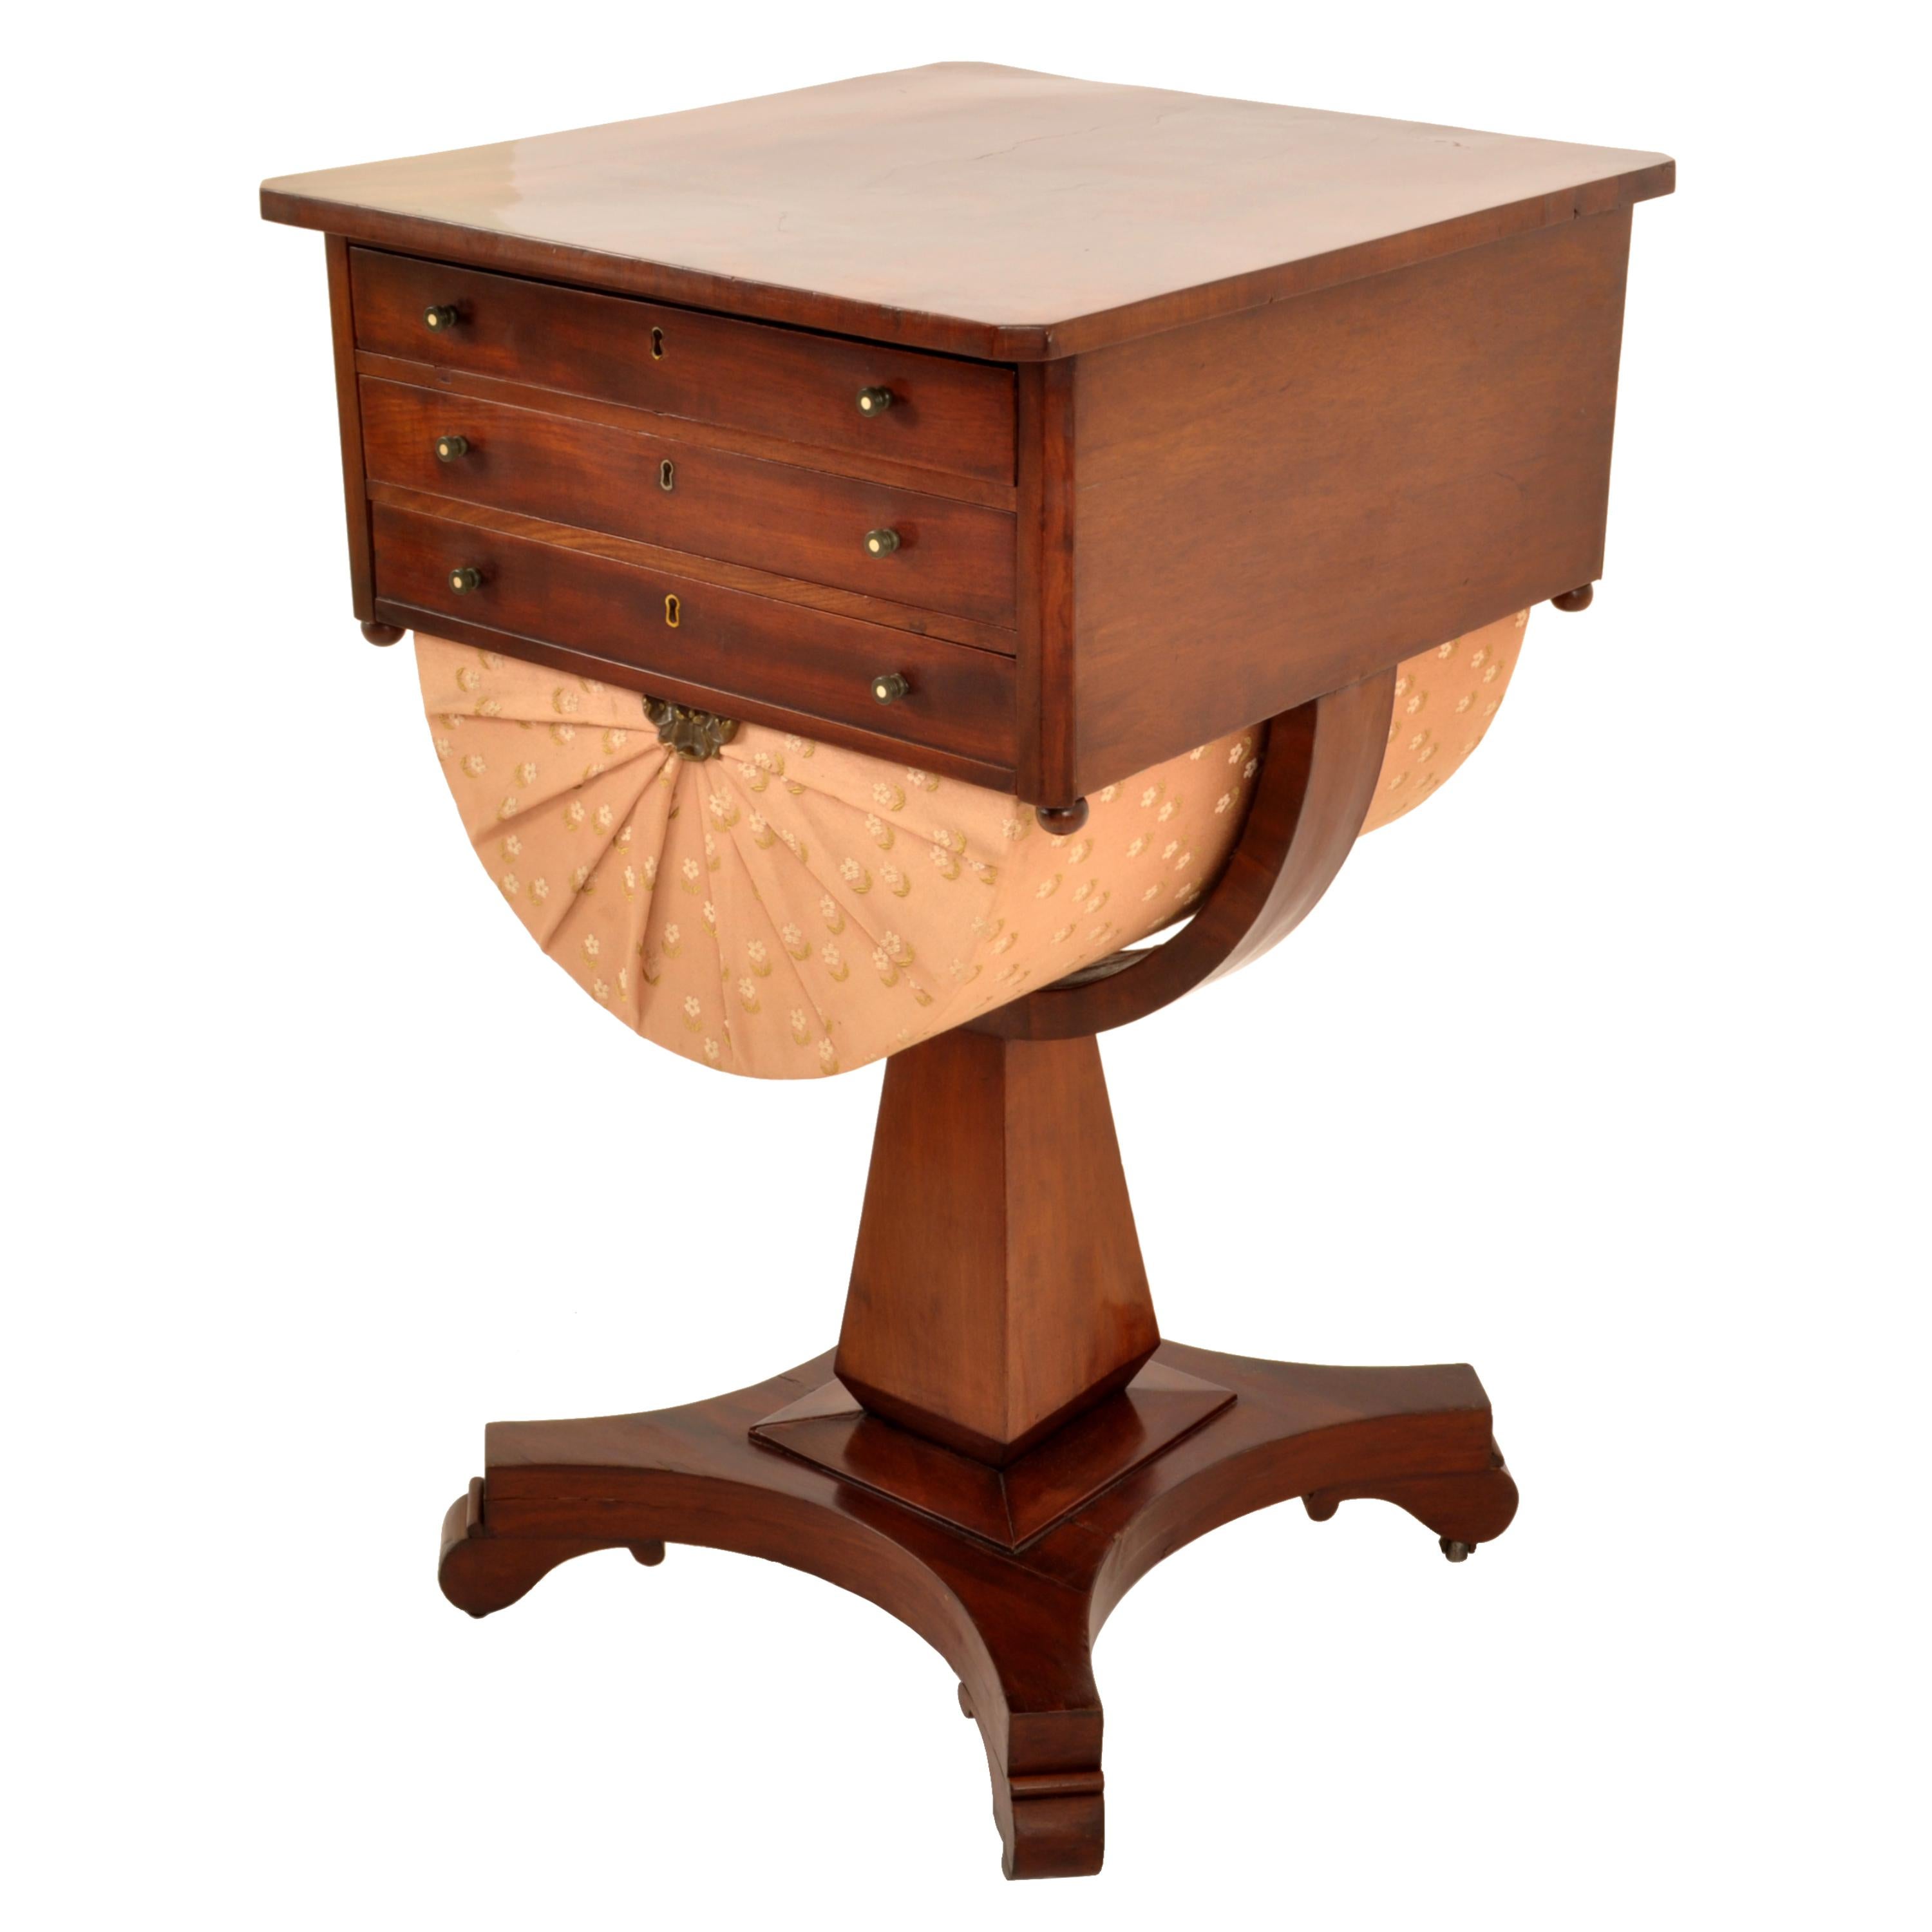 Antique American Empire Mahogany Pedestal Sewing Work Table New York Circa 1840 For Sale 4